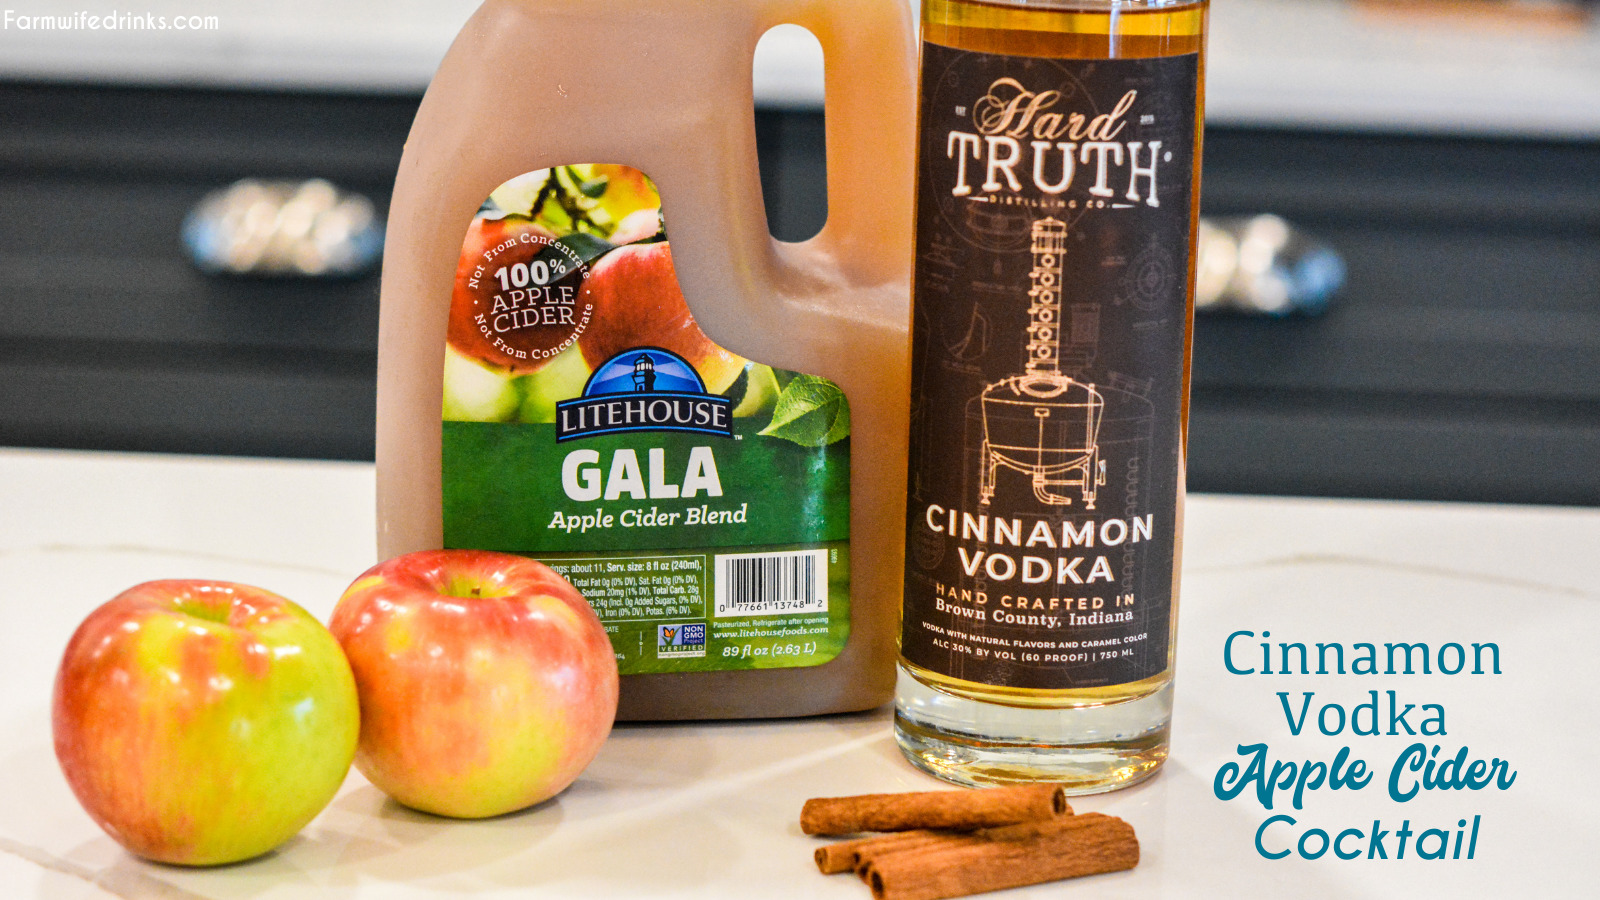 Cinnamon vodka apple cider cocktail is a simple fall cocktail ingredients